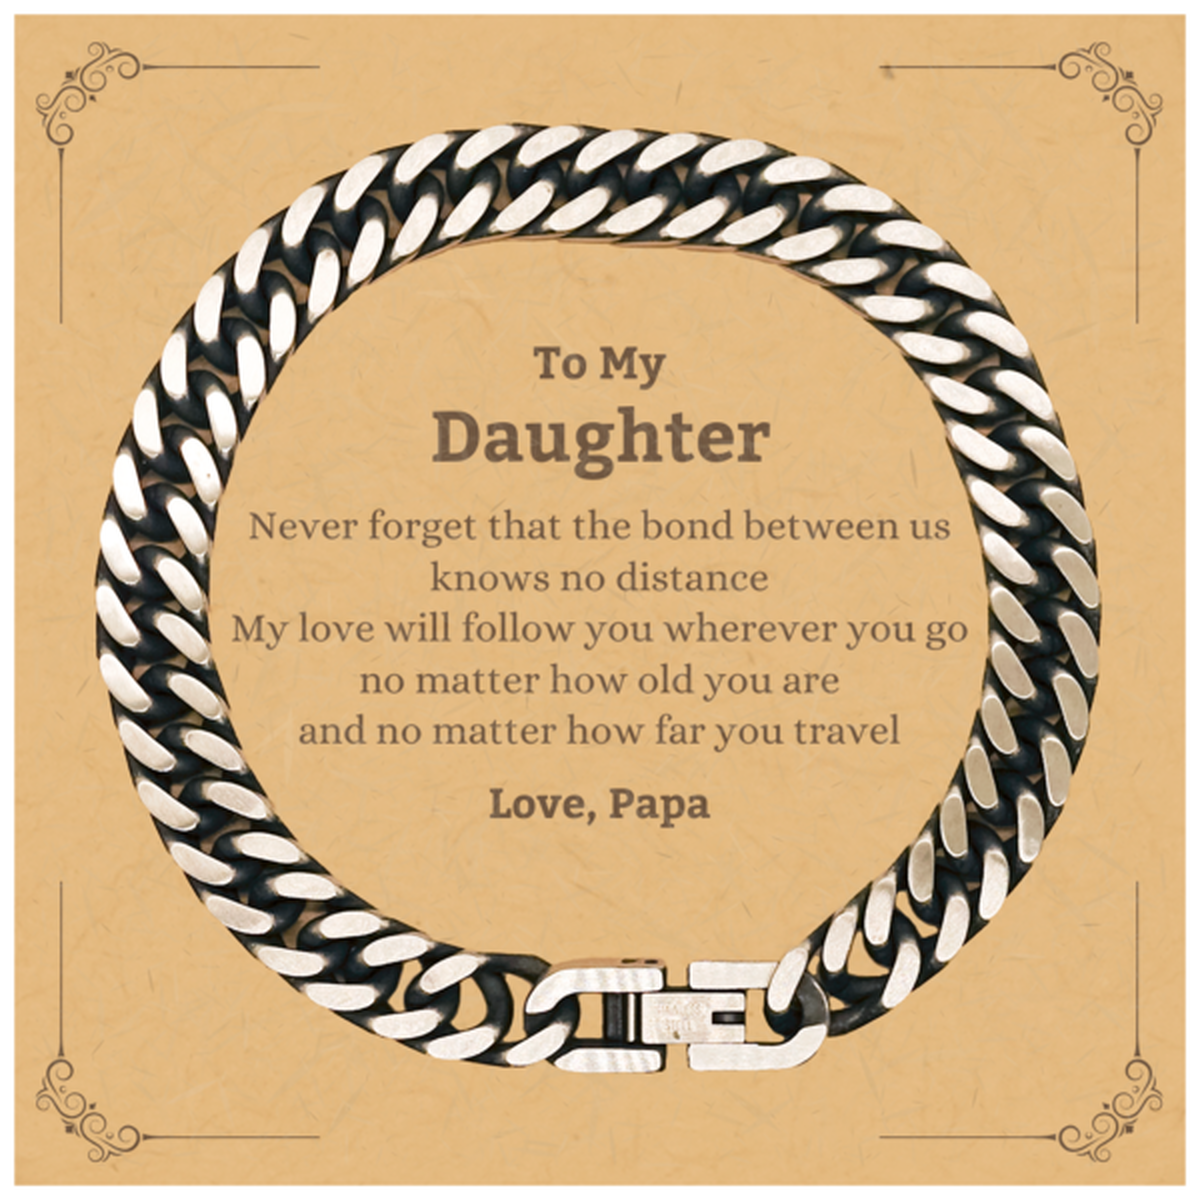 Daughter Birthday Gifts from Papa, Adjustable Cuban Link Chain Bracelet for Daughter Christmas Graduation Unique Gifts Daughter Never forget that the bond between us knows no distance. Love, Papa